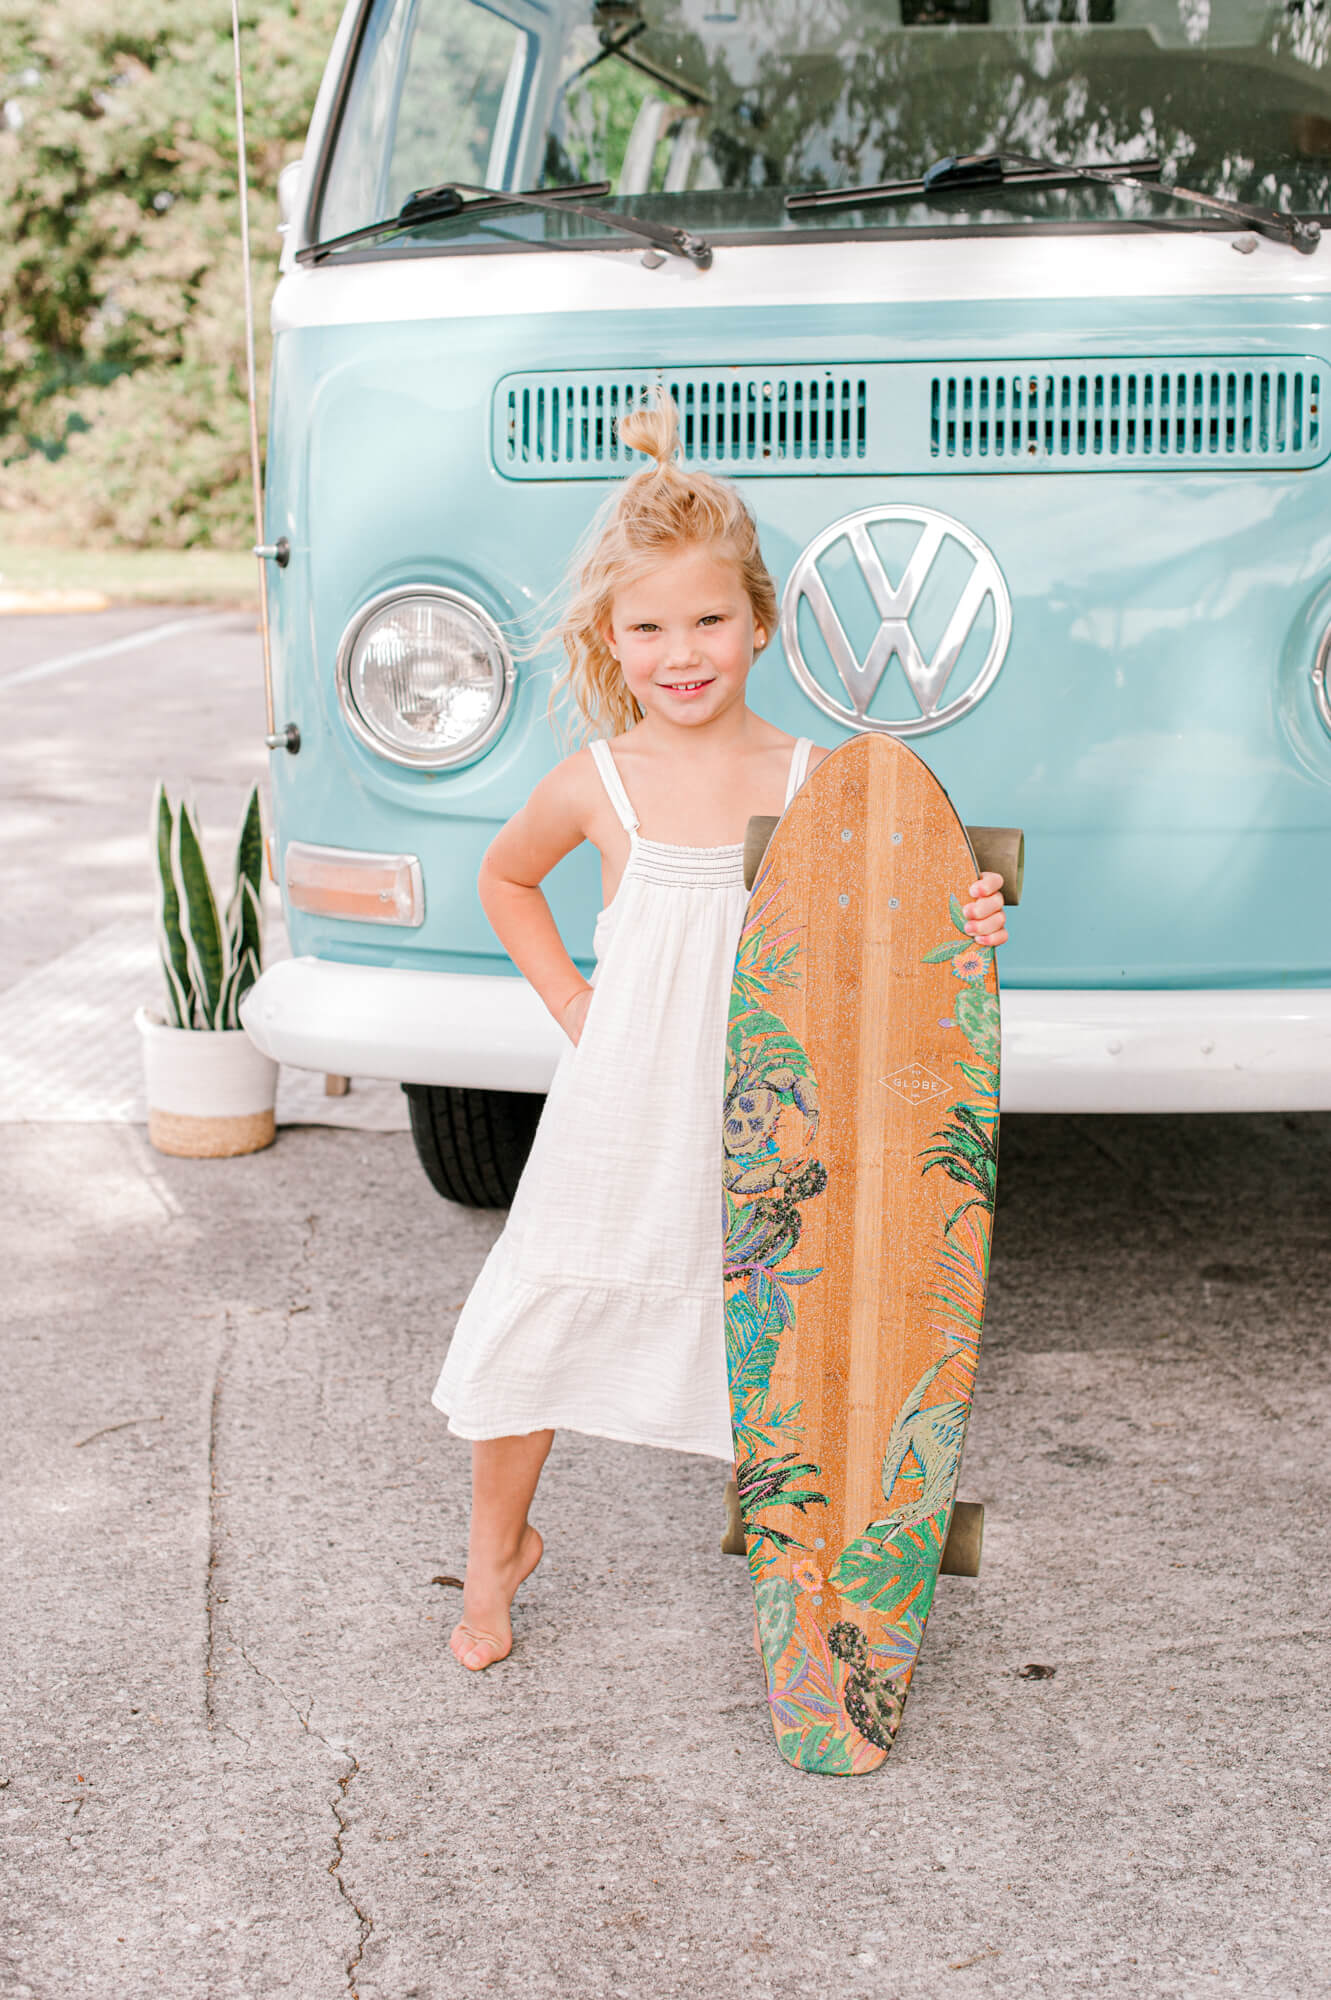 Cutest young blonde beach babe holding a skateboard and posing in front of a VW bus